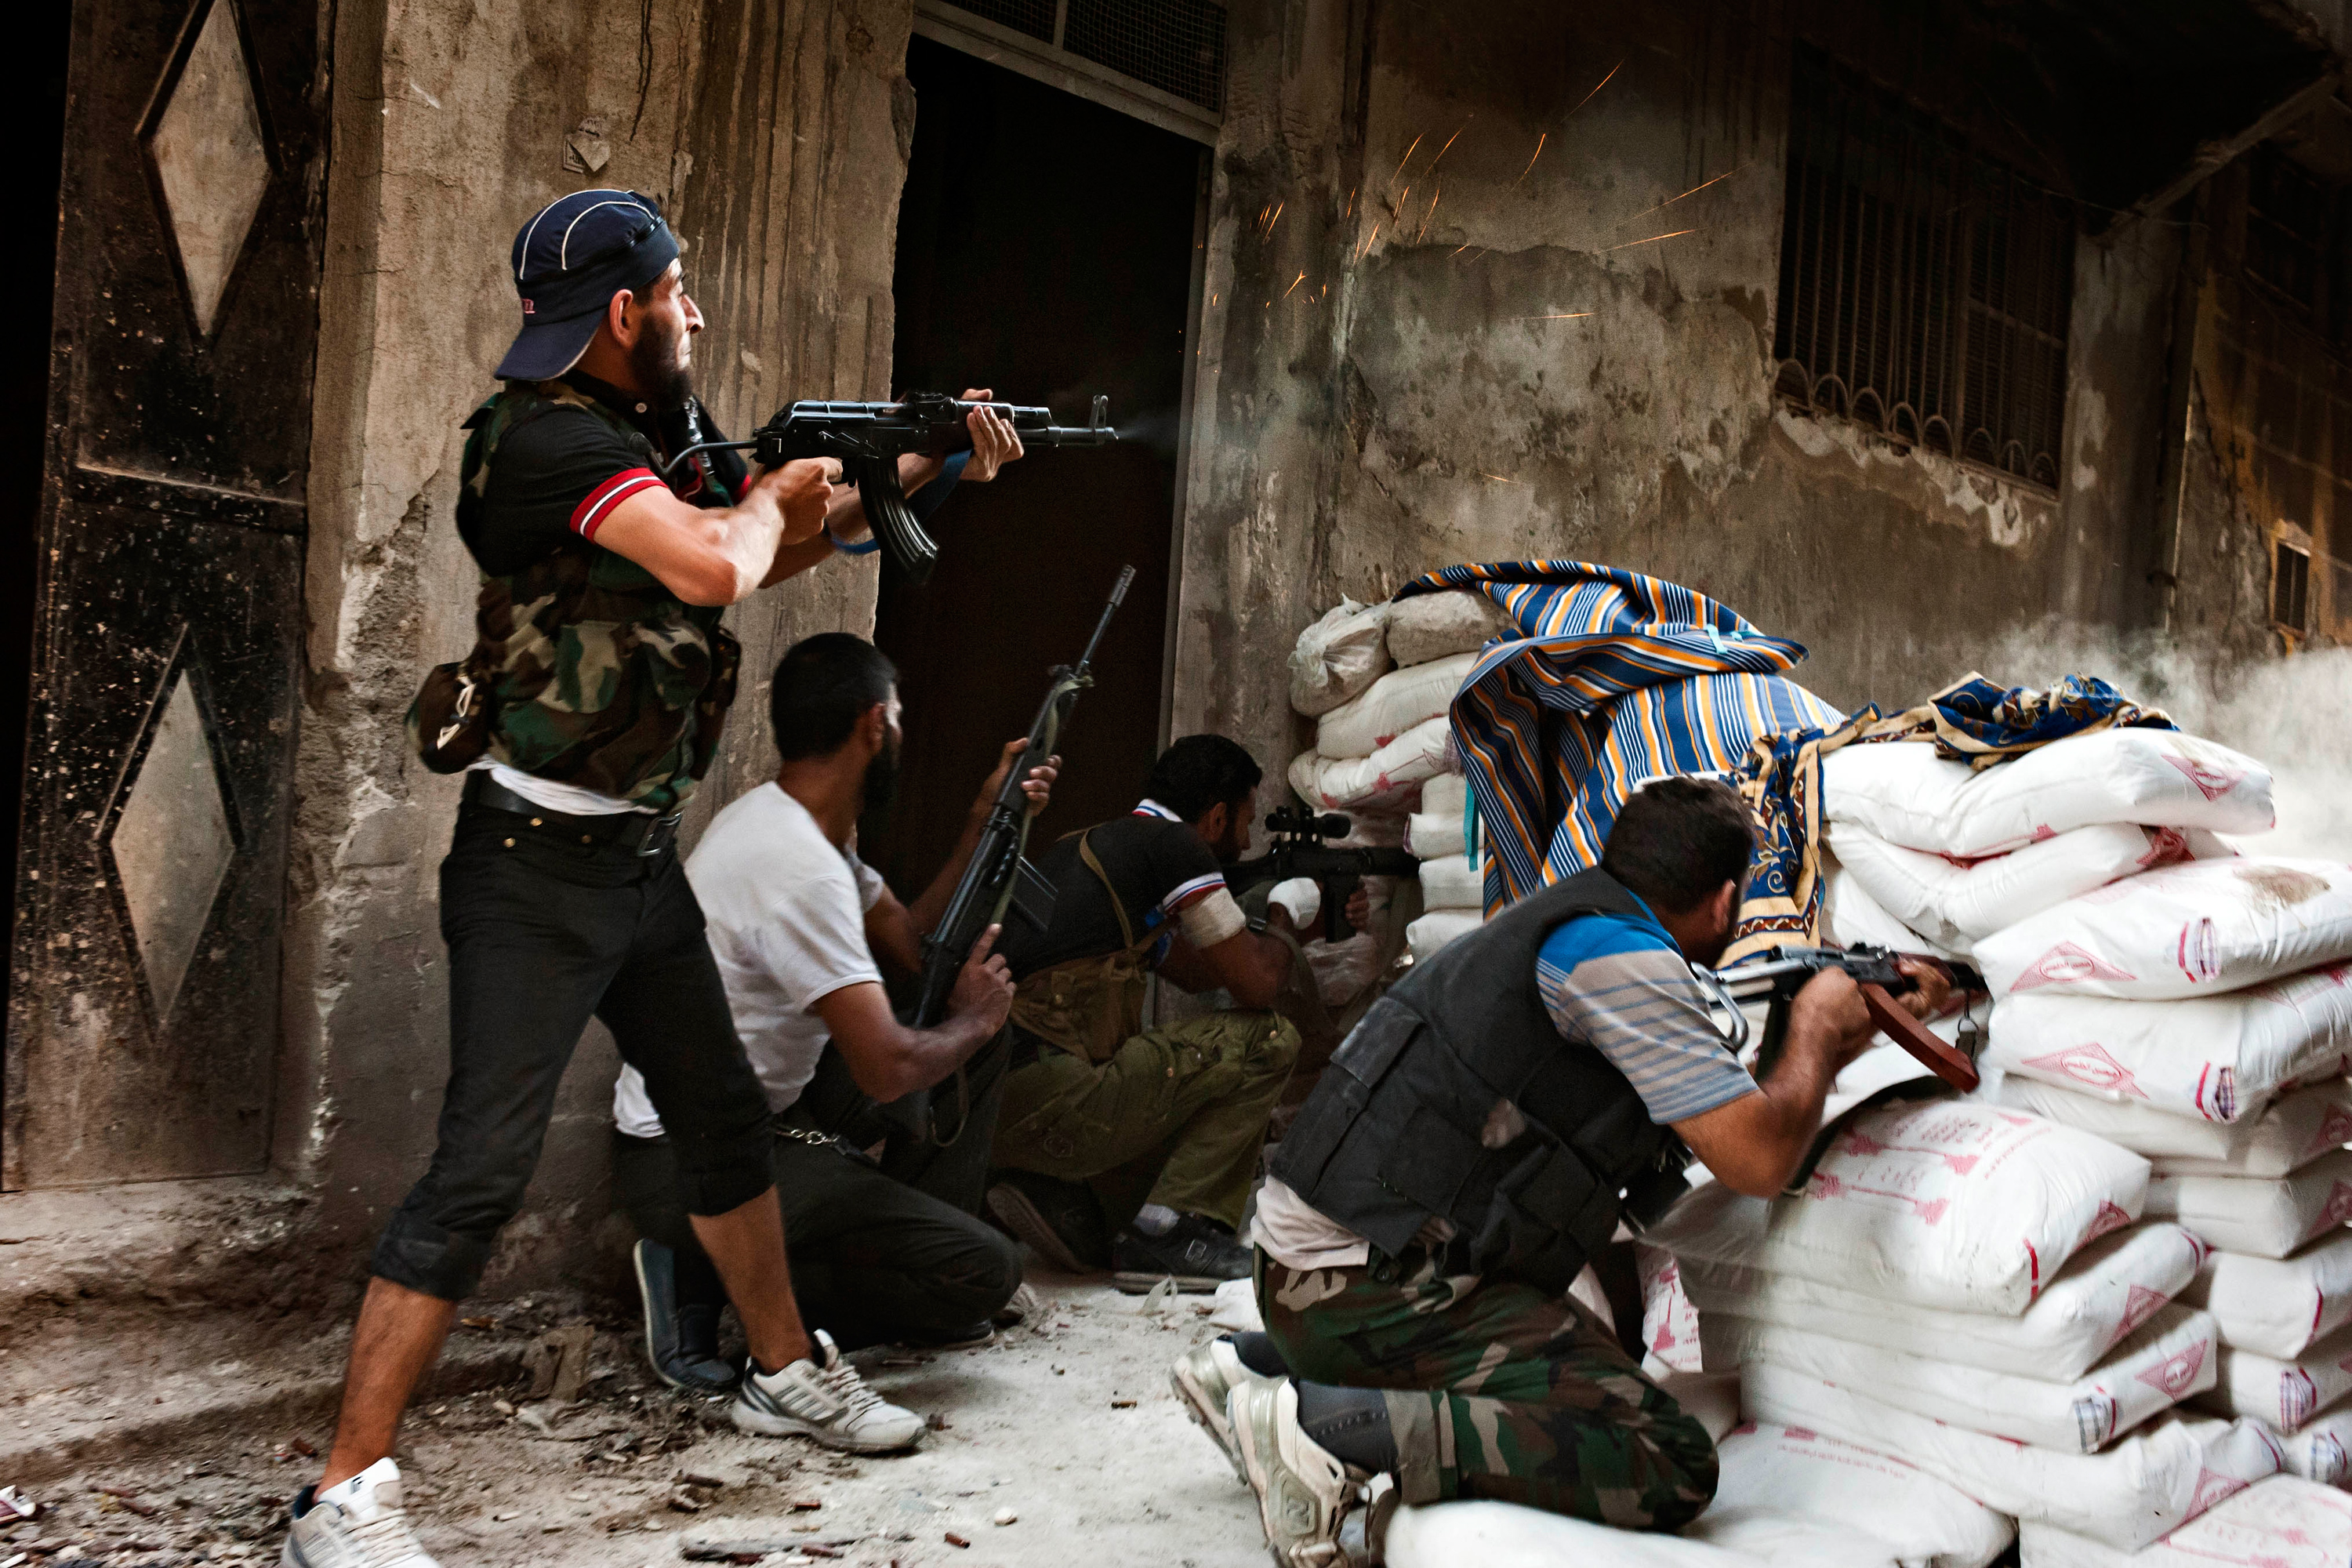 Free Syrian Army fighters exchange fire with regime forces in the Salah Al Din neighborhood of Aleppo, Aug. 22.